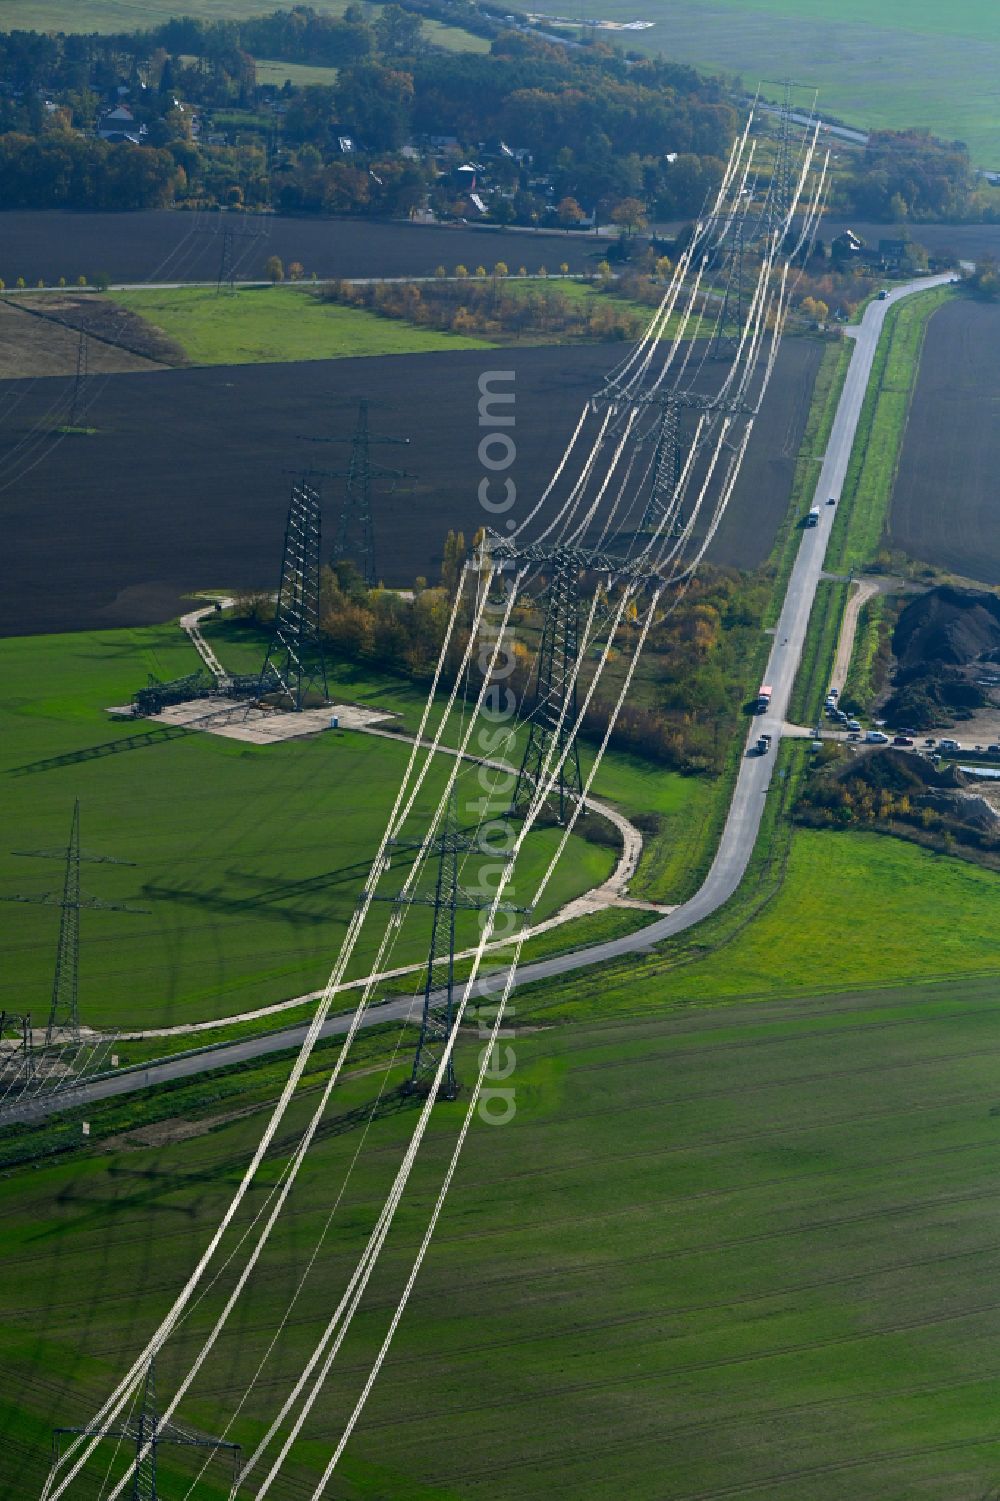 Altlandsberg from above - Current route of the power lines and pylons in Altlandsberg in the state Brandenburg, Germany